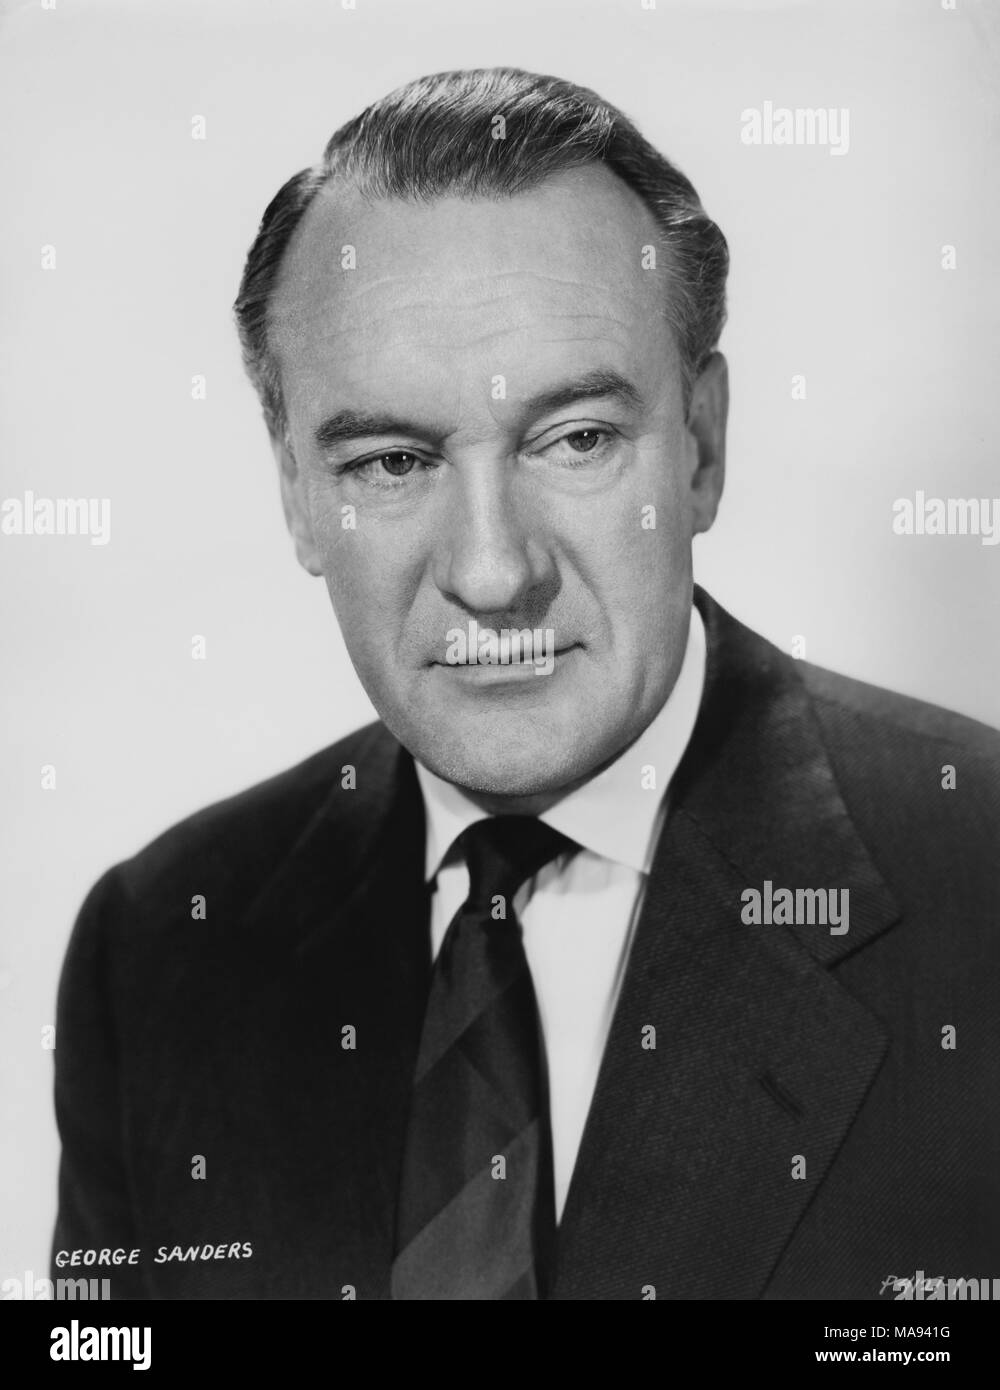 George Sanders, Publicity Portrait for the Film, 'That Certain Feeling', Paramount Pictures, 1956 Stock Photo